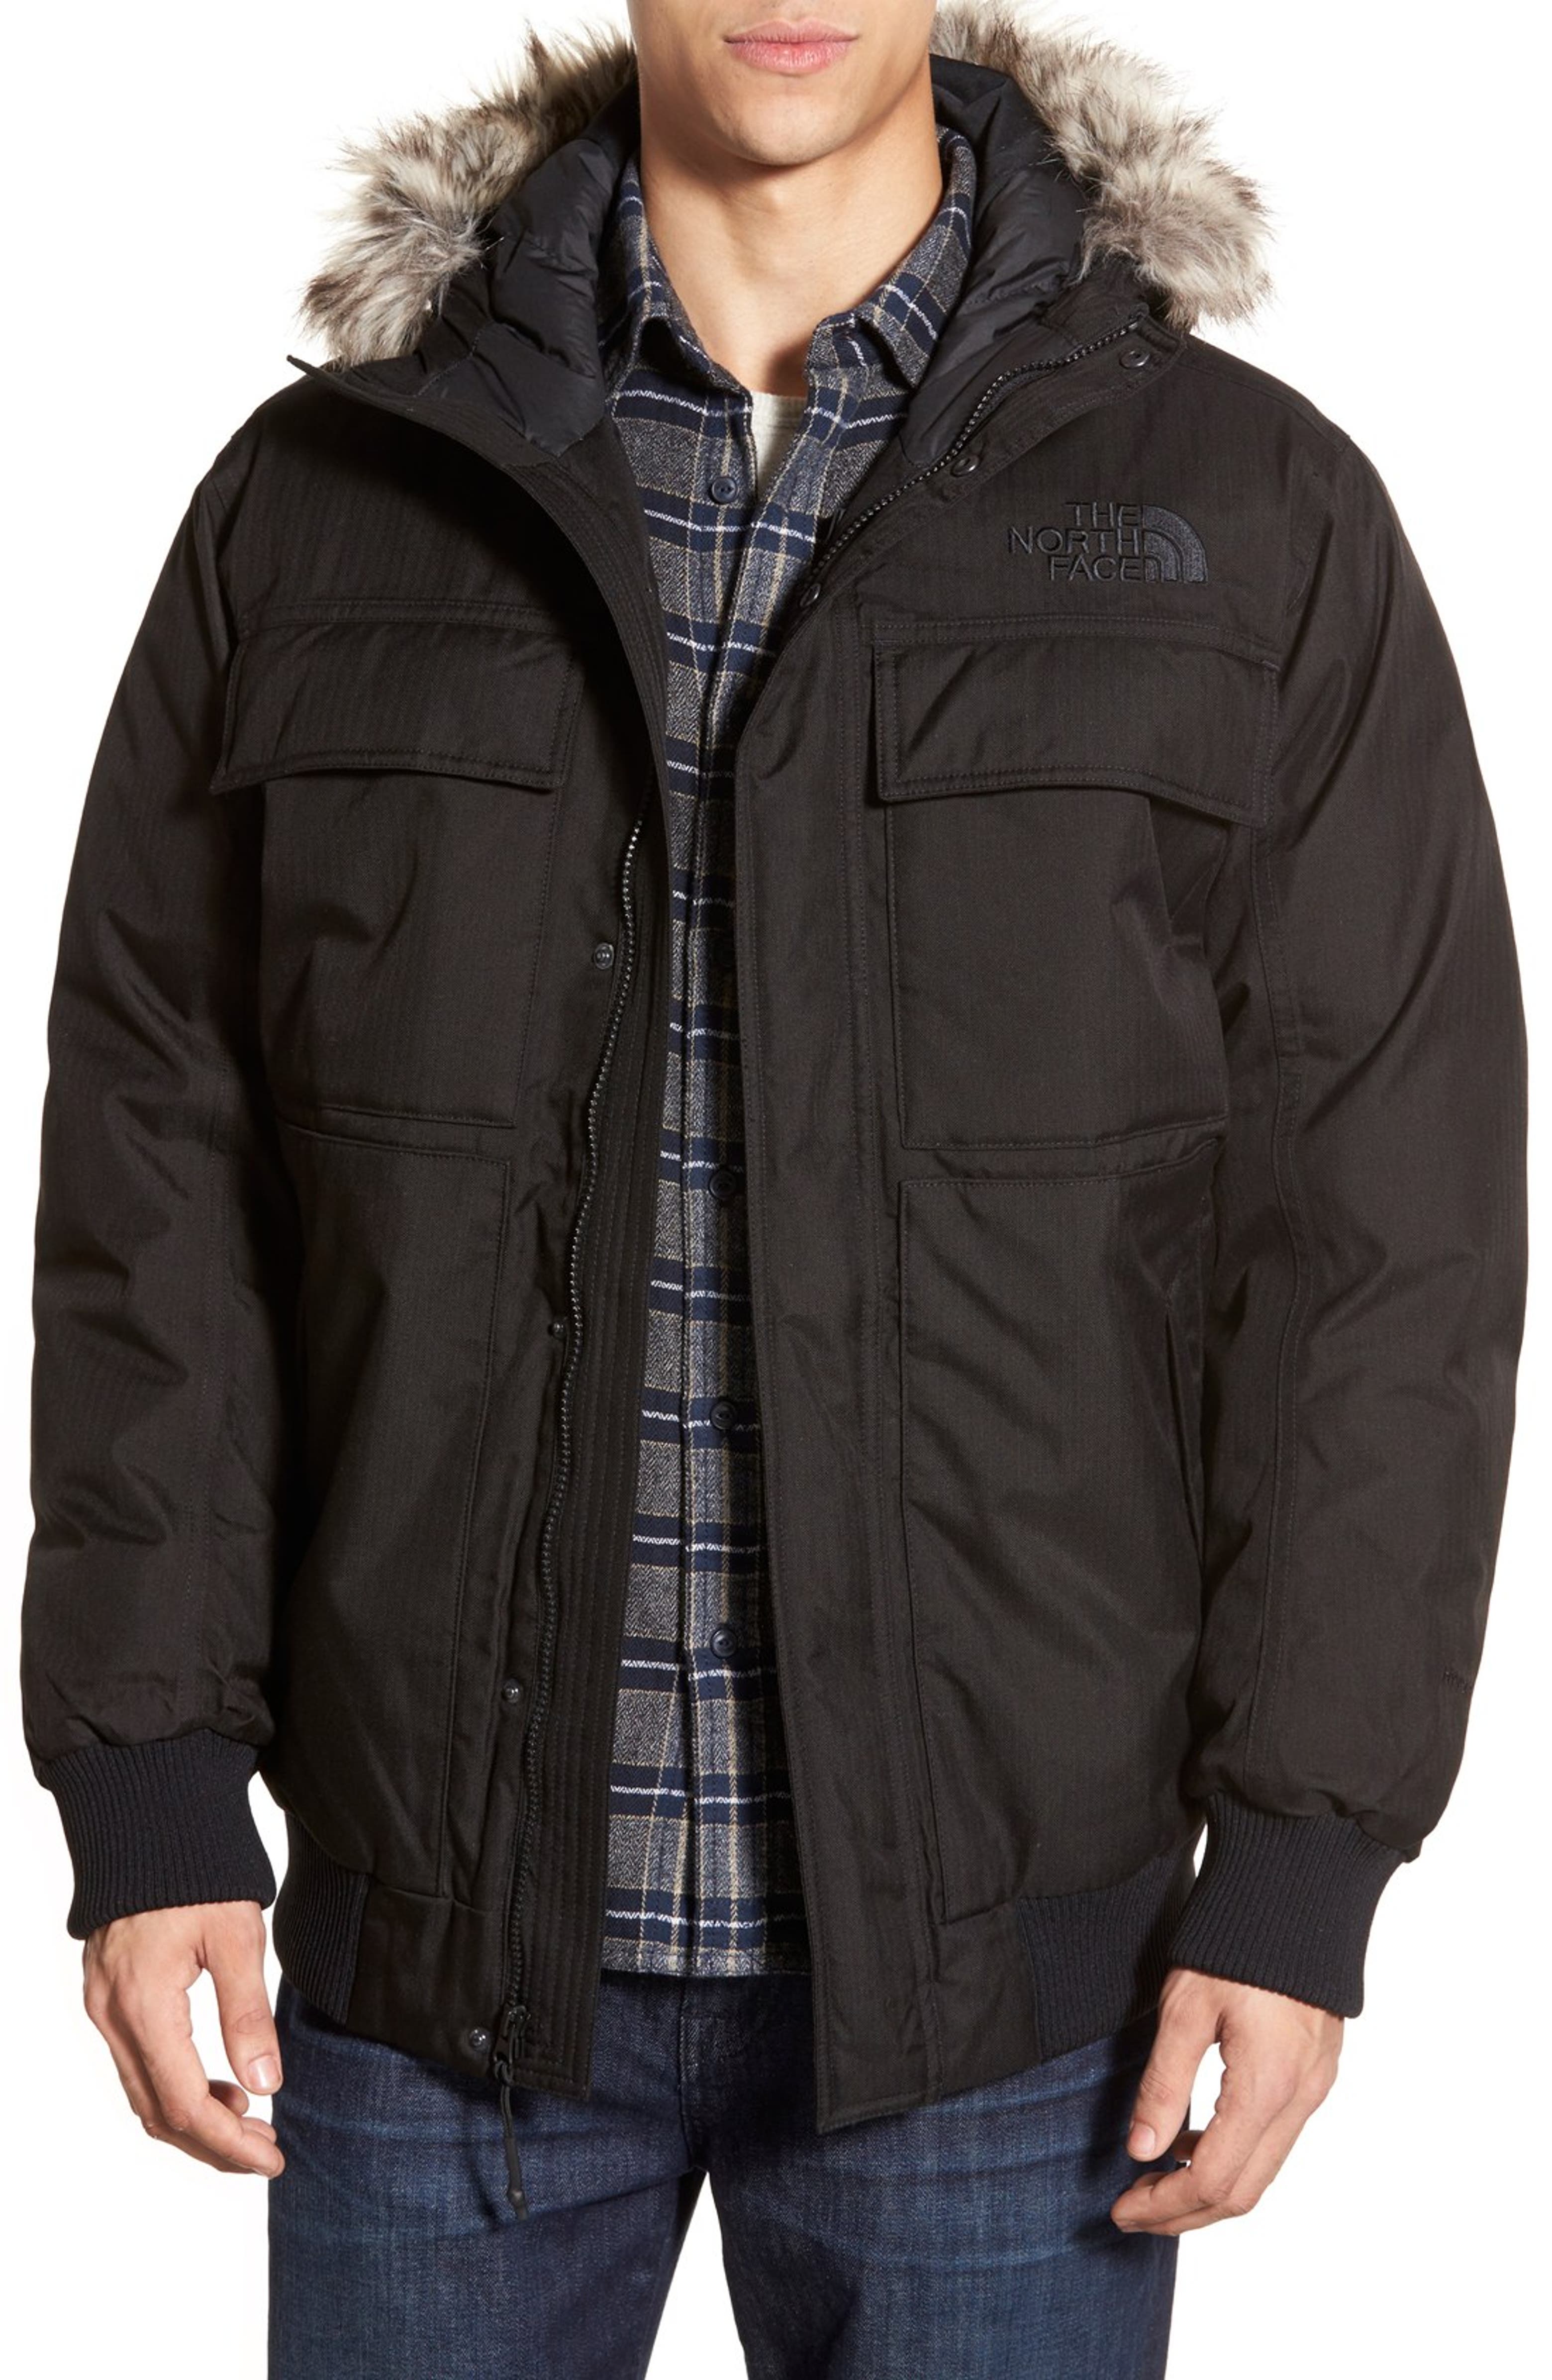 The North Face Gotham Ii Hooded Goose Down Jacket With Faux Fur Trim Nordstrom